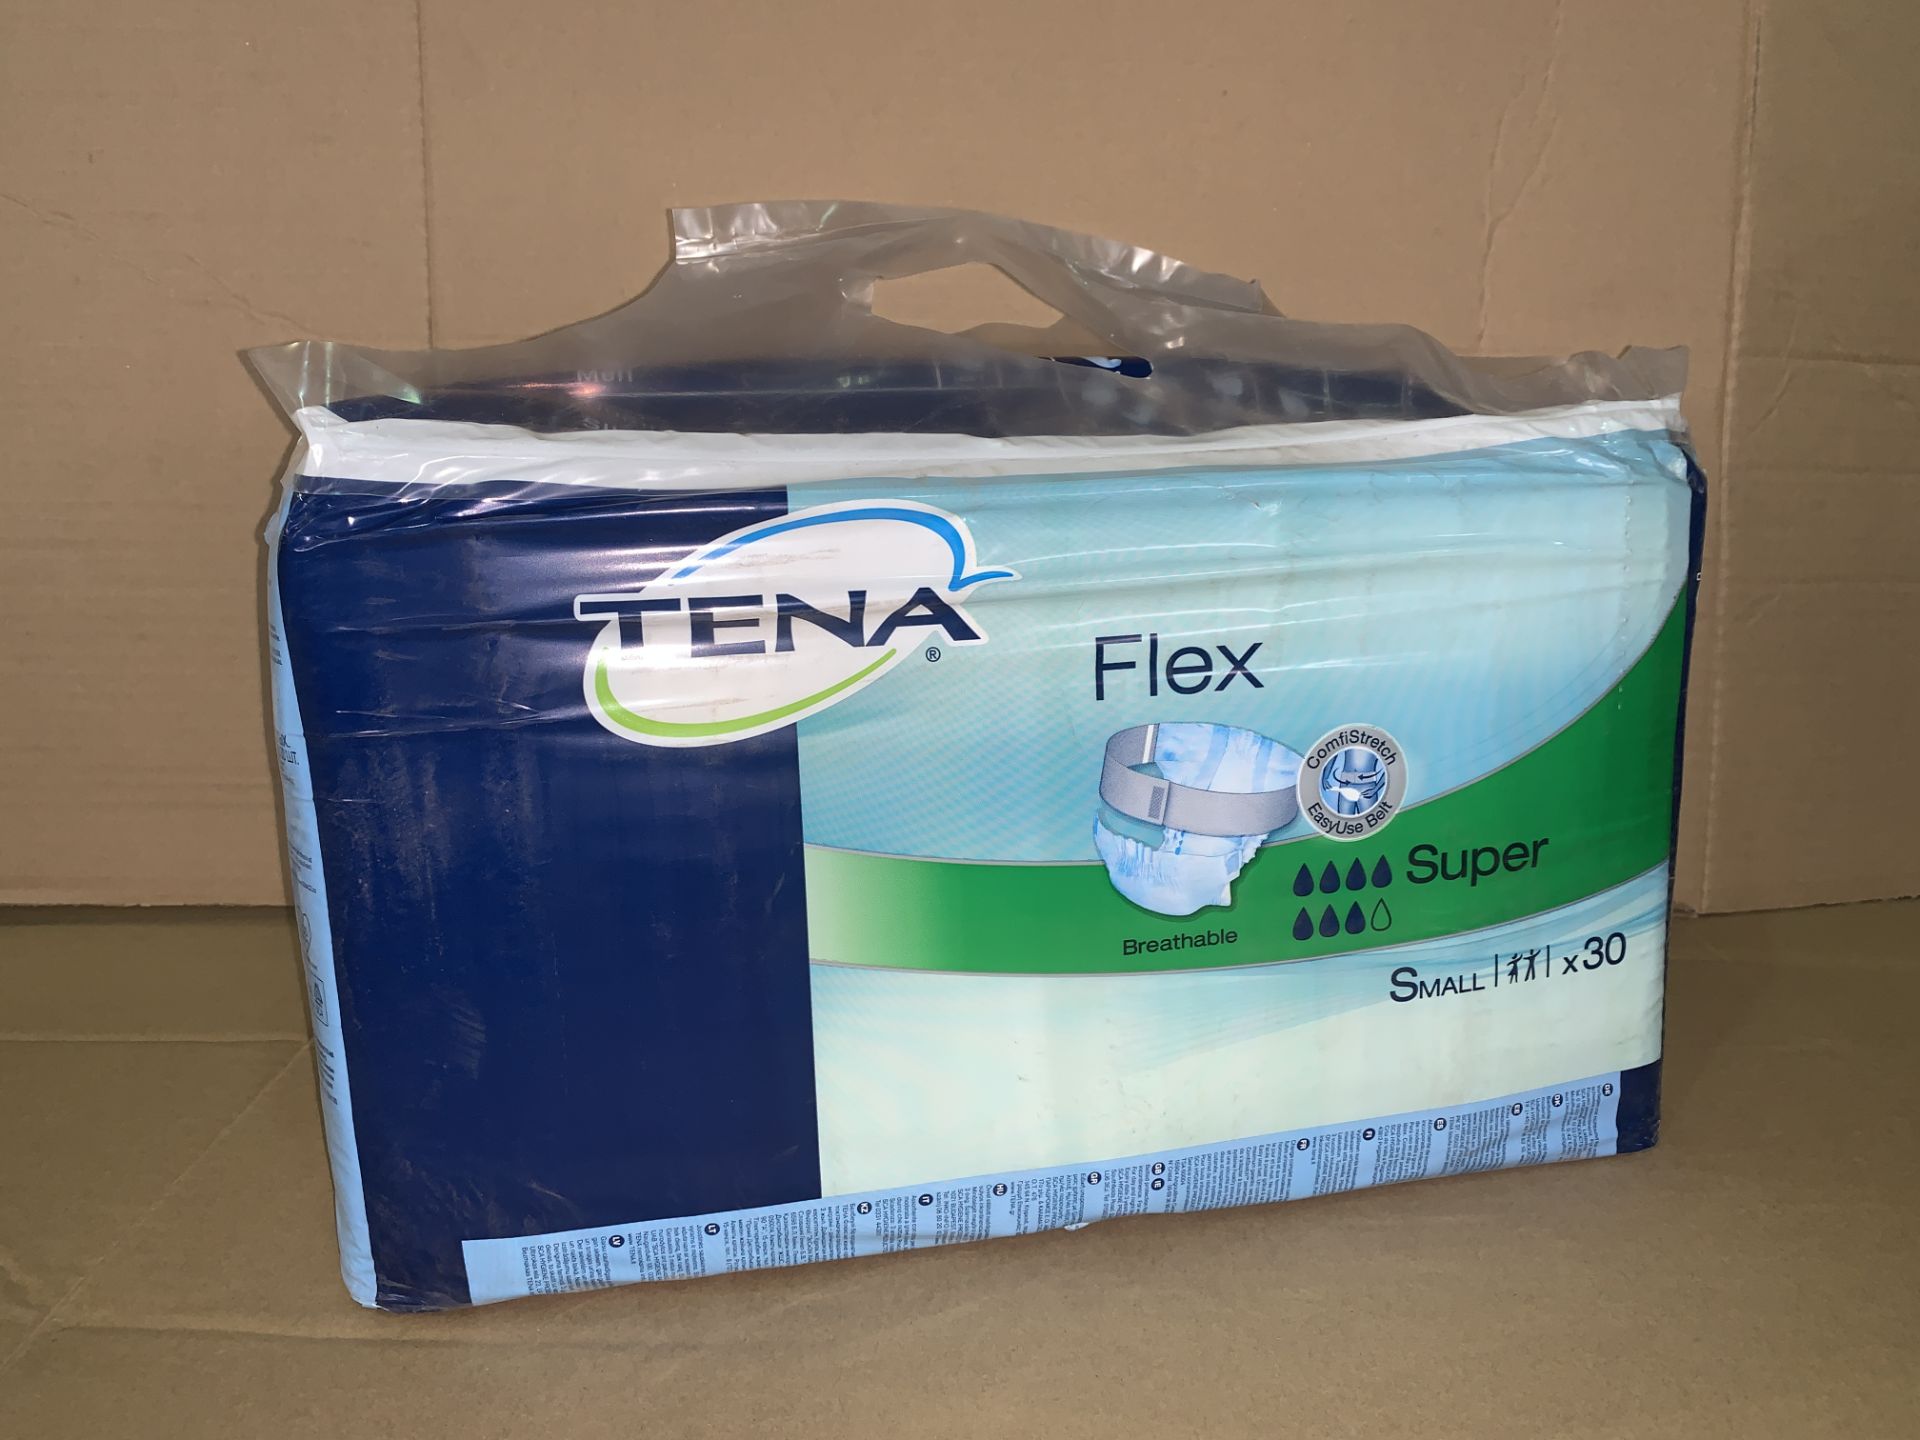 15 X BRAND NEW PACKS OF 30 TENA FLEX SUPER INCONTINENCE PANTS SIZE SMALL IN 5 BOXES R15